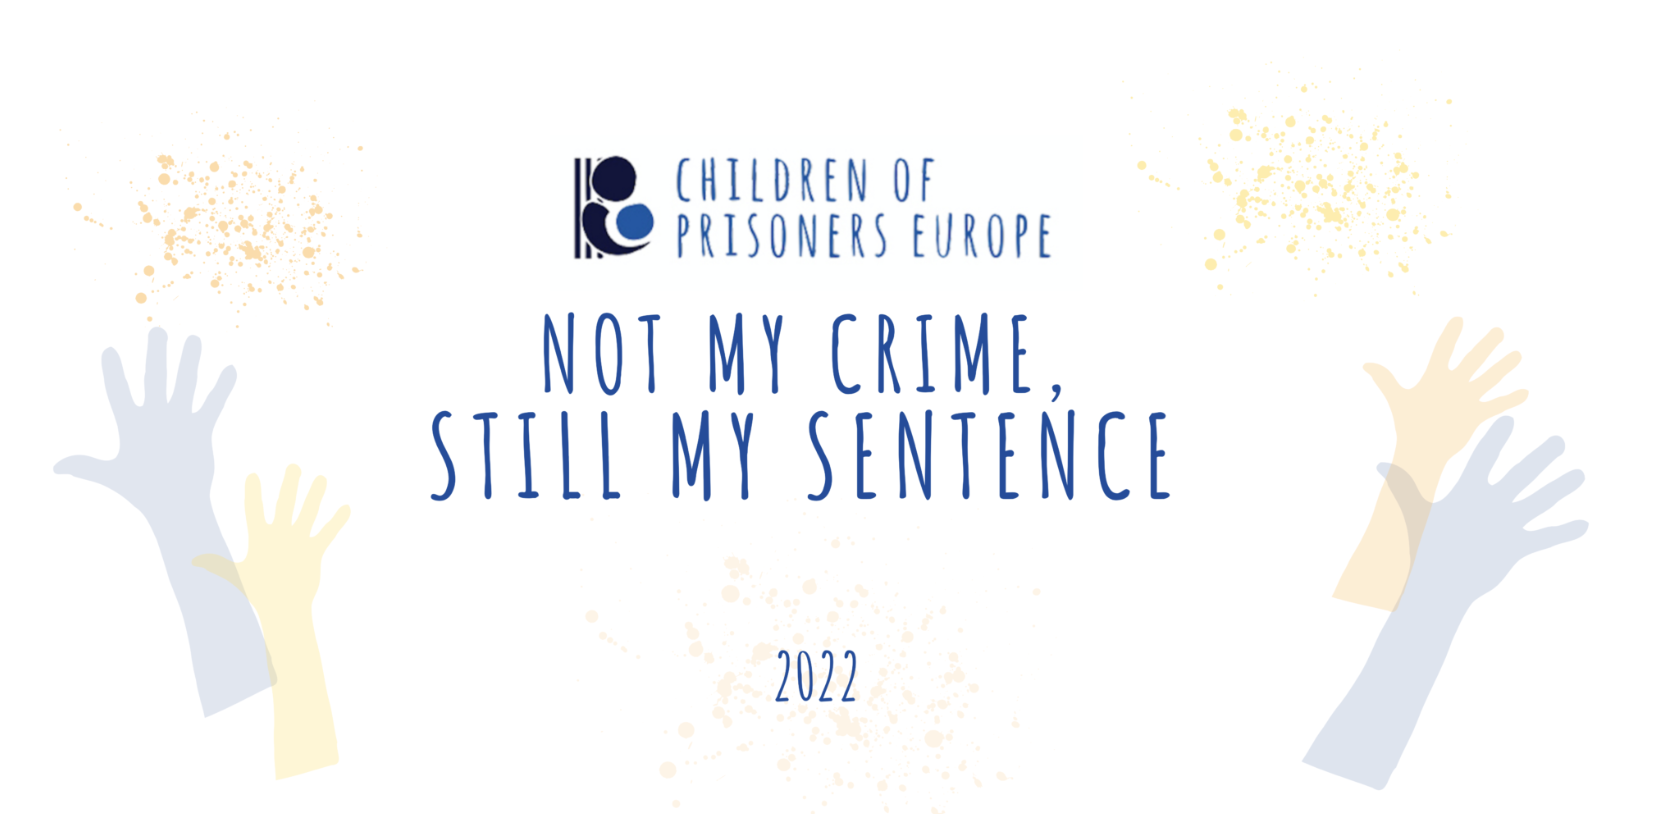 Campaign 2022: Not my crime, still my silence